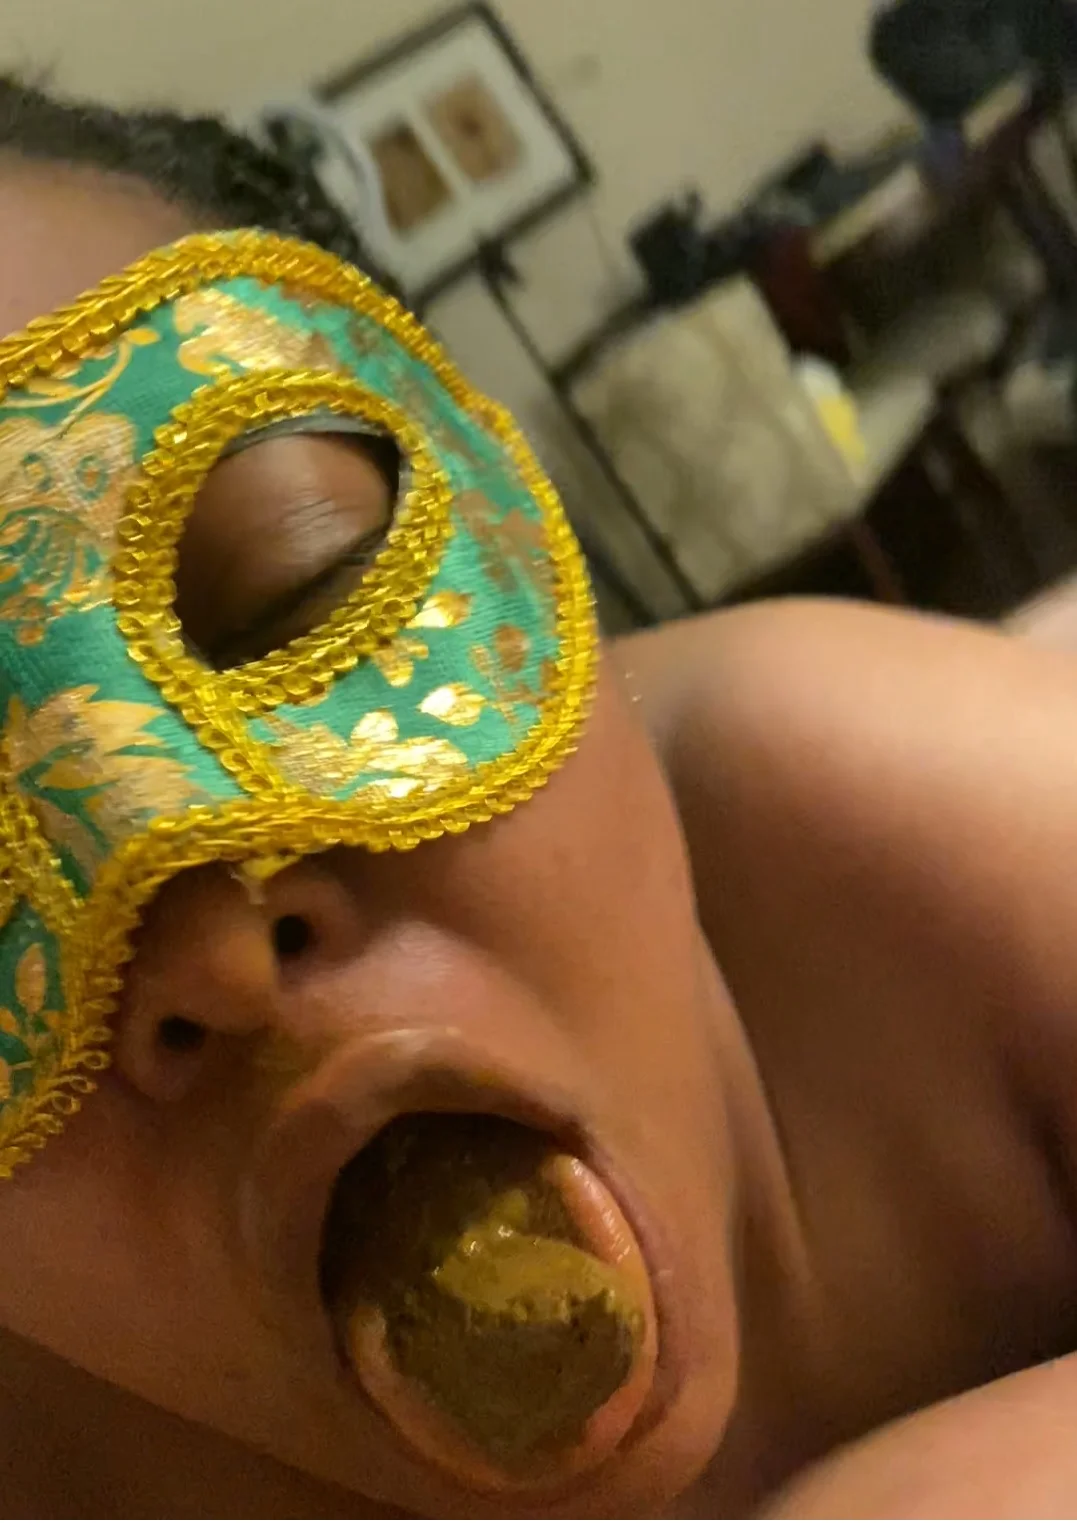 Slave munches on multiple mouthfuls from my ass - ThisVid.com